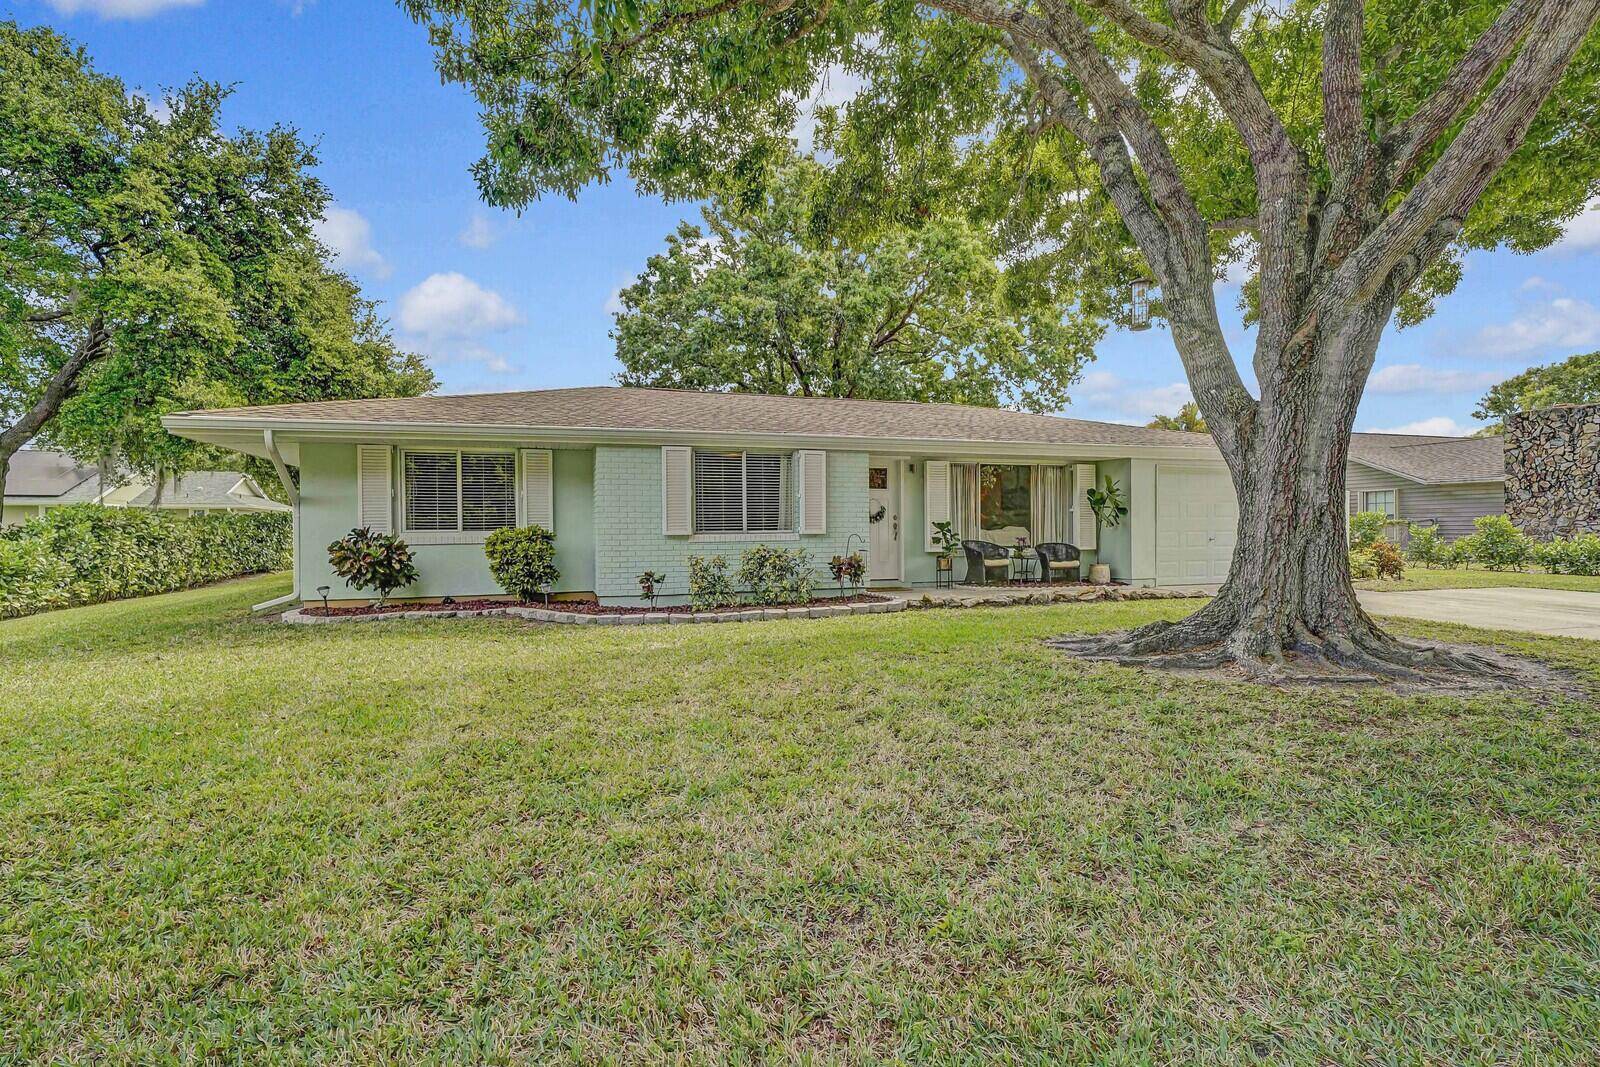 Escape to your ideal retreat with this charming single family home in the idyllic Vero Shores neighborhood.